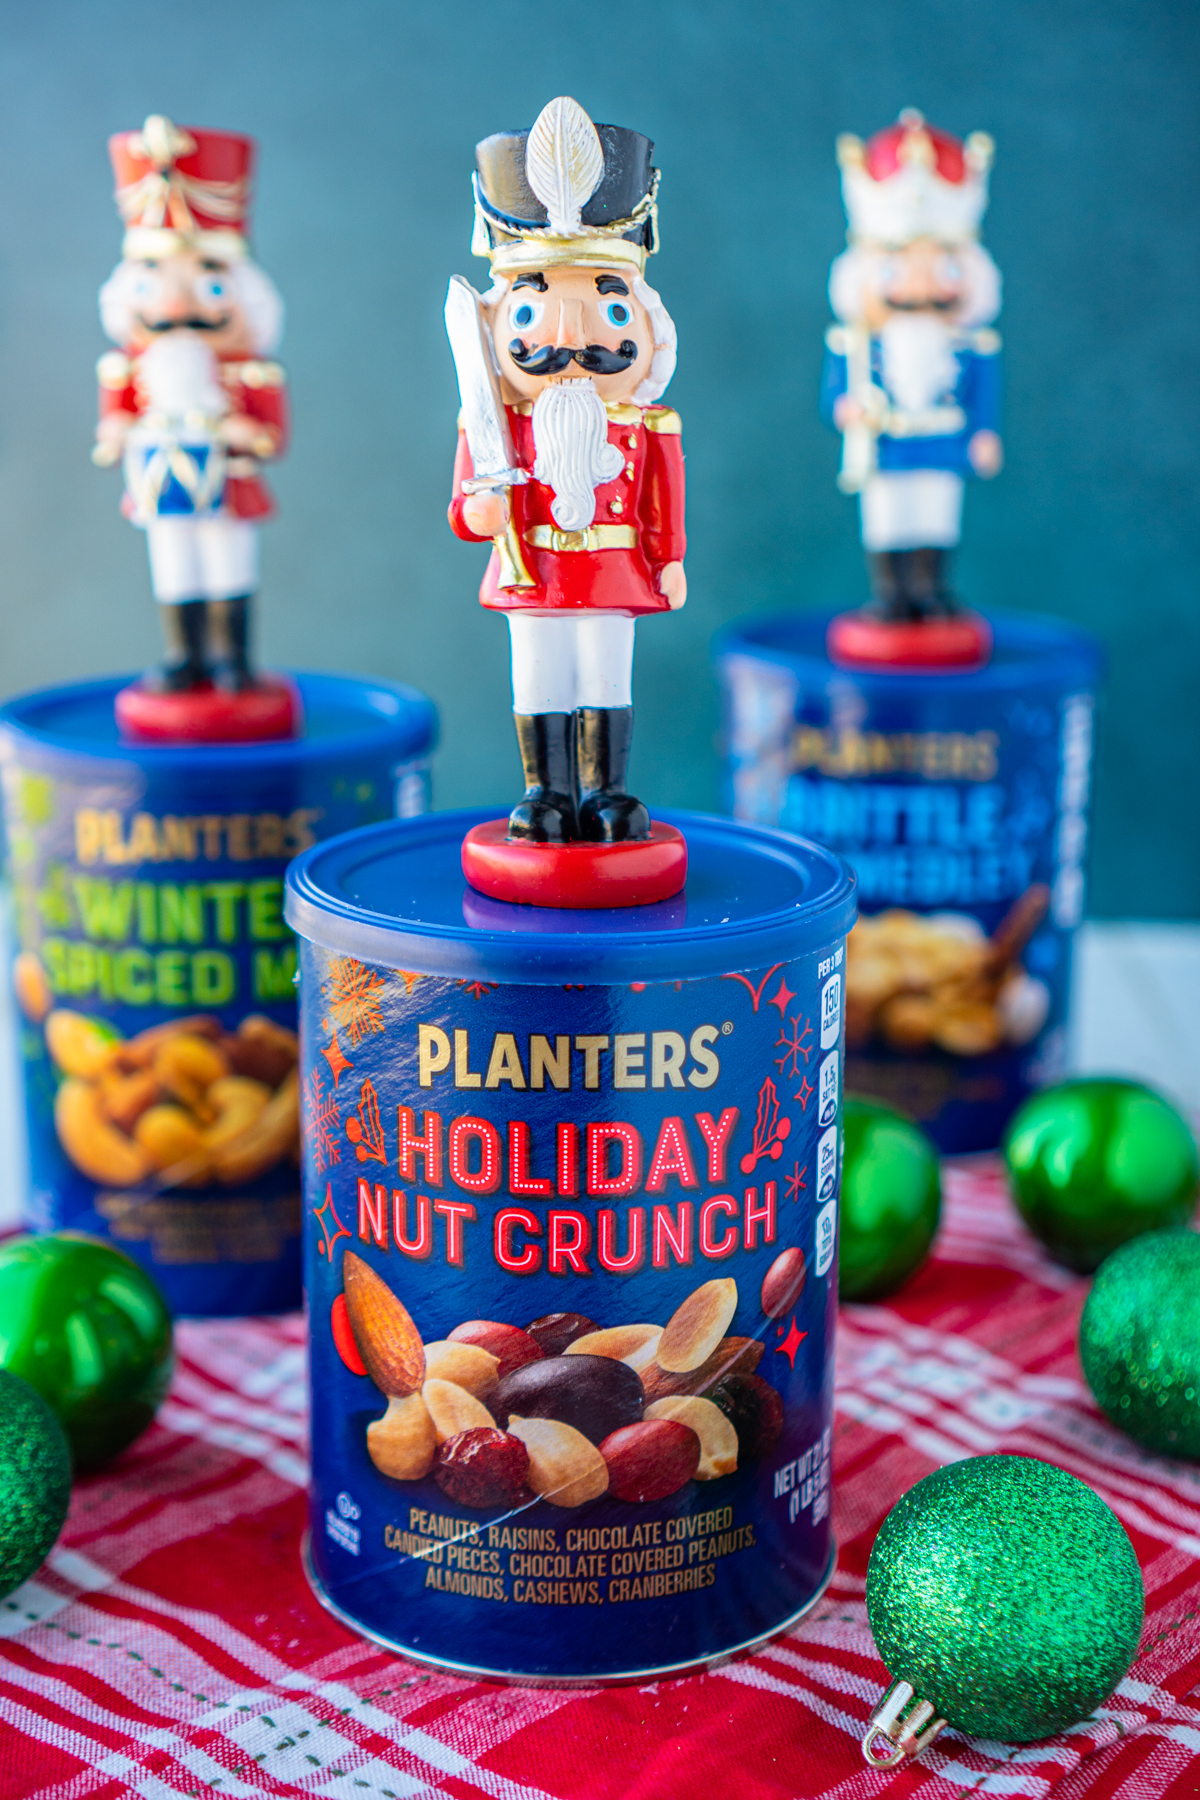 Containers of mixed nuts with nutcrackers on top